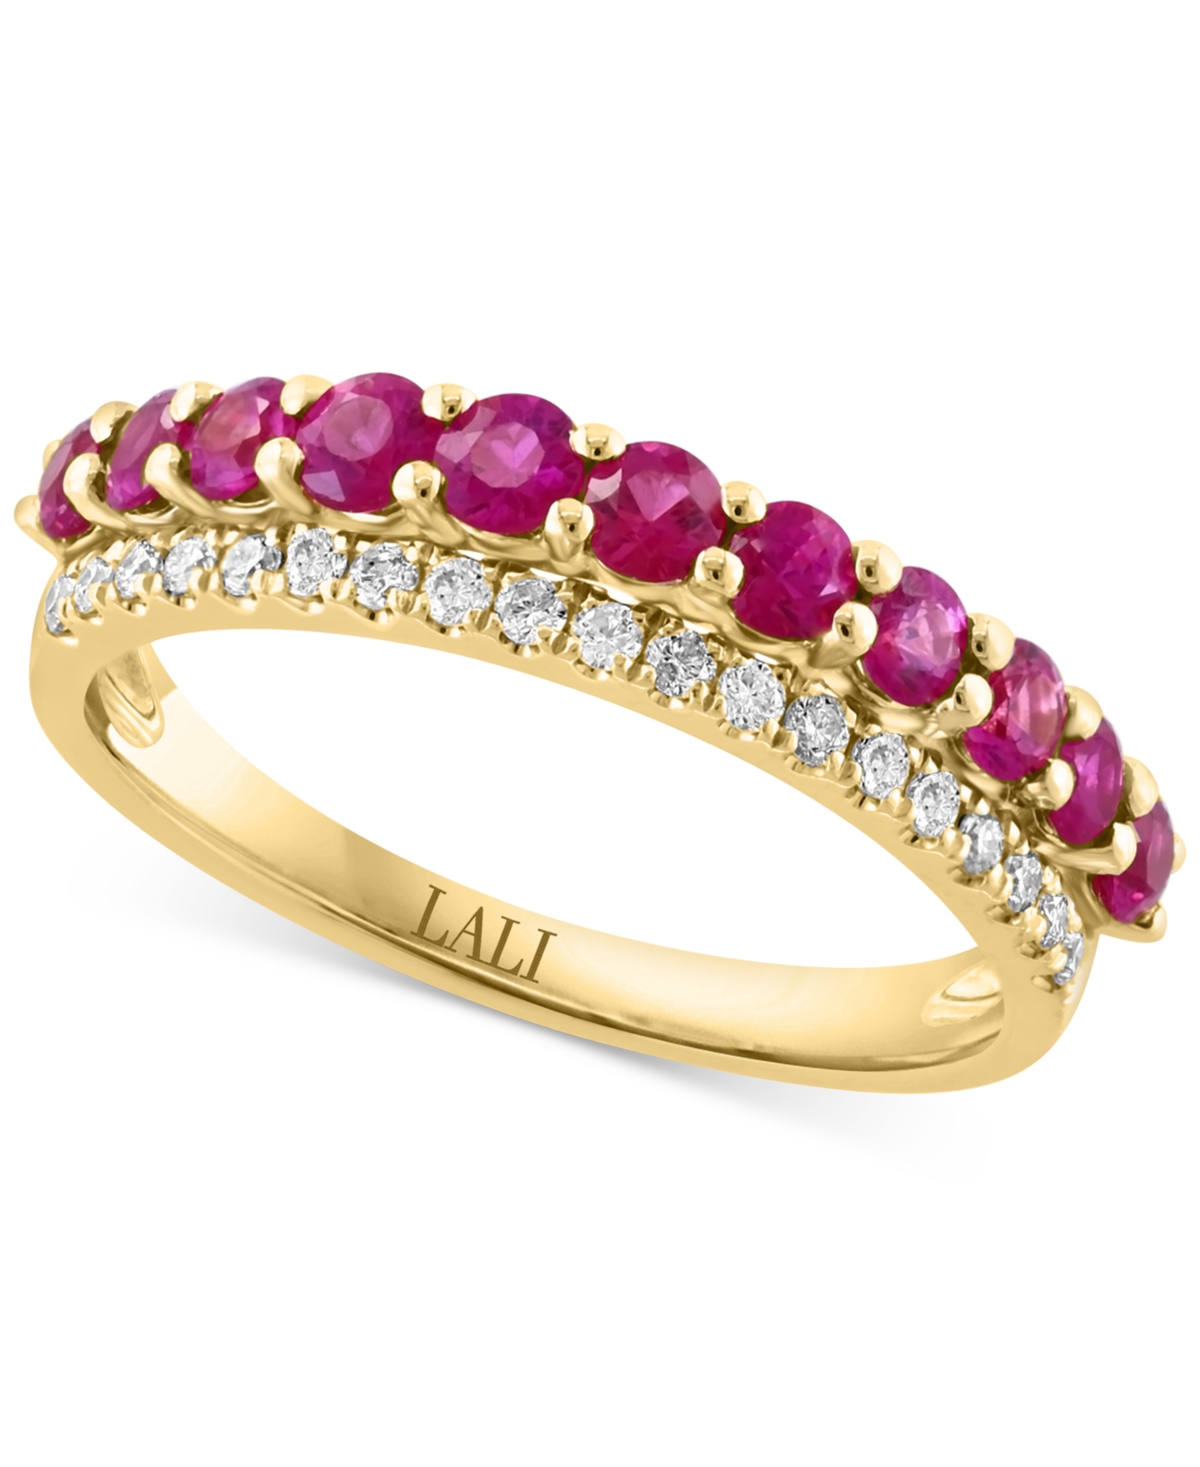 Ruby (7/8 ct. t.w.) & Diamond (1/5 ct. t.w.) Double Row Ring in 14k Gold - Gold